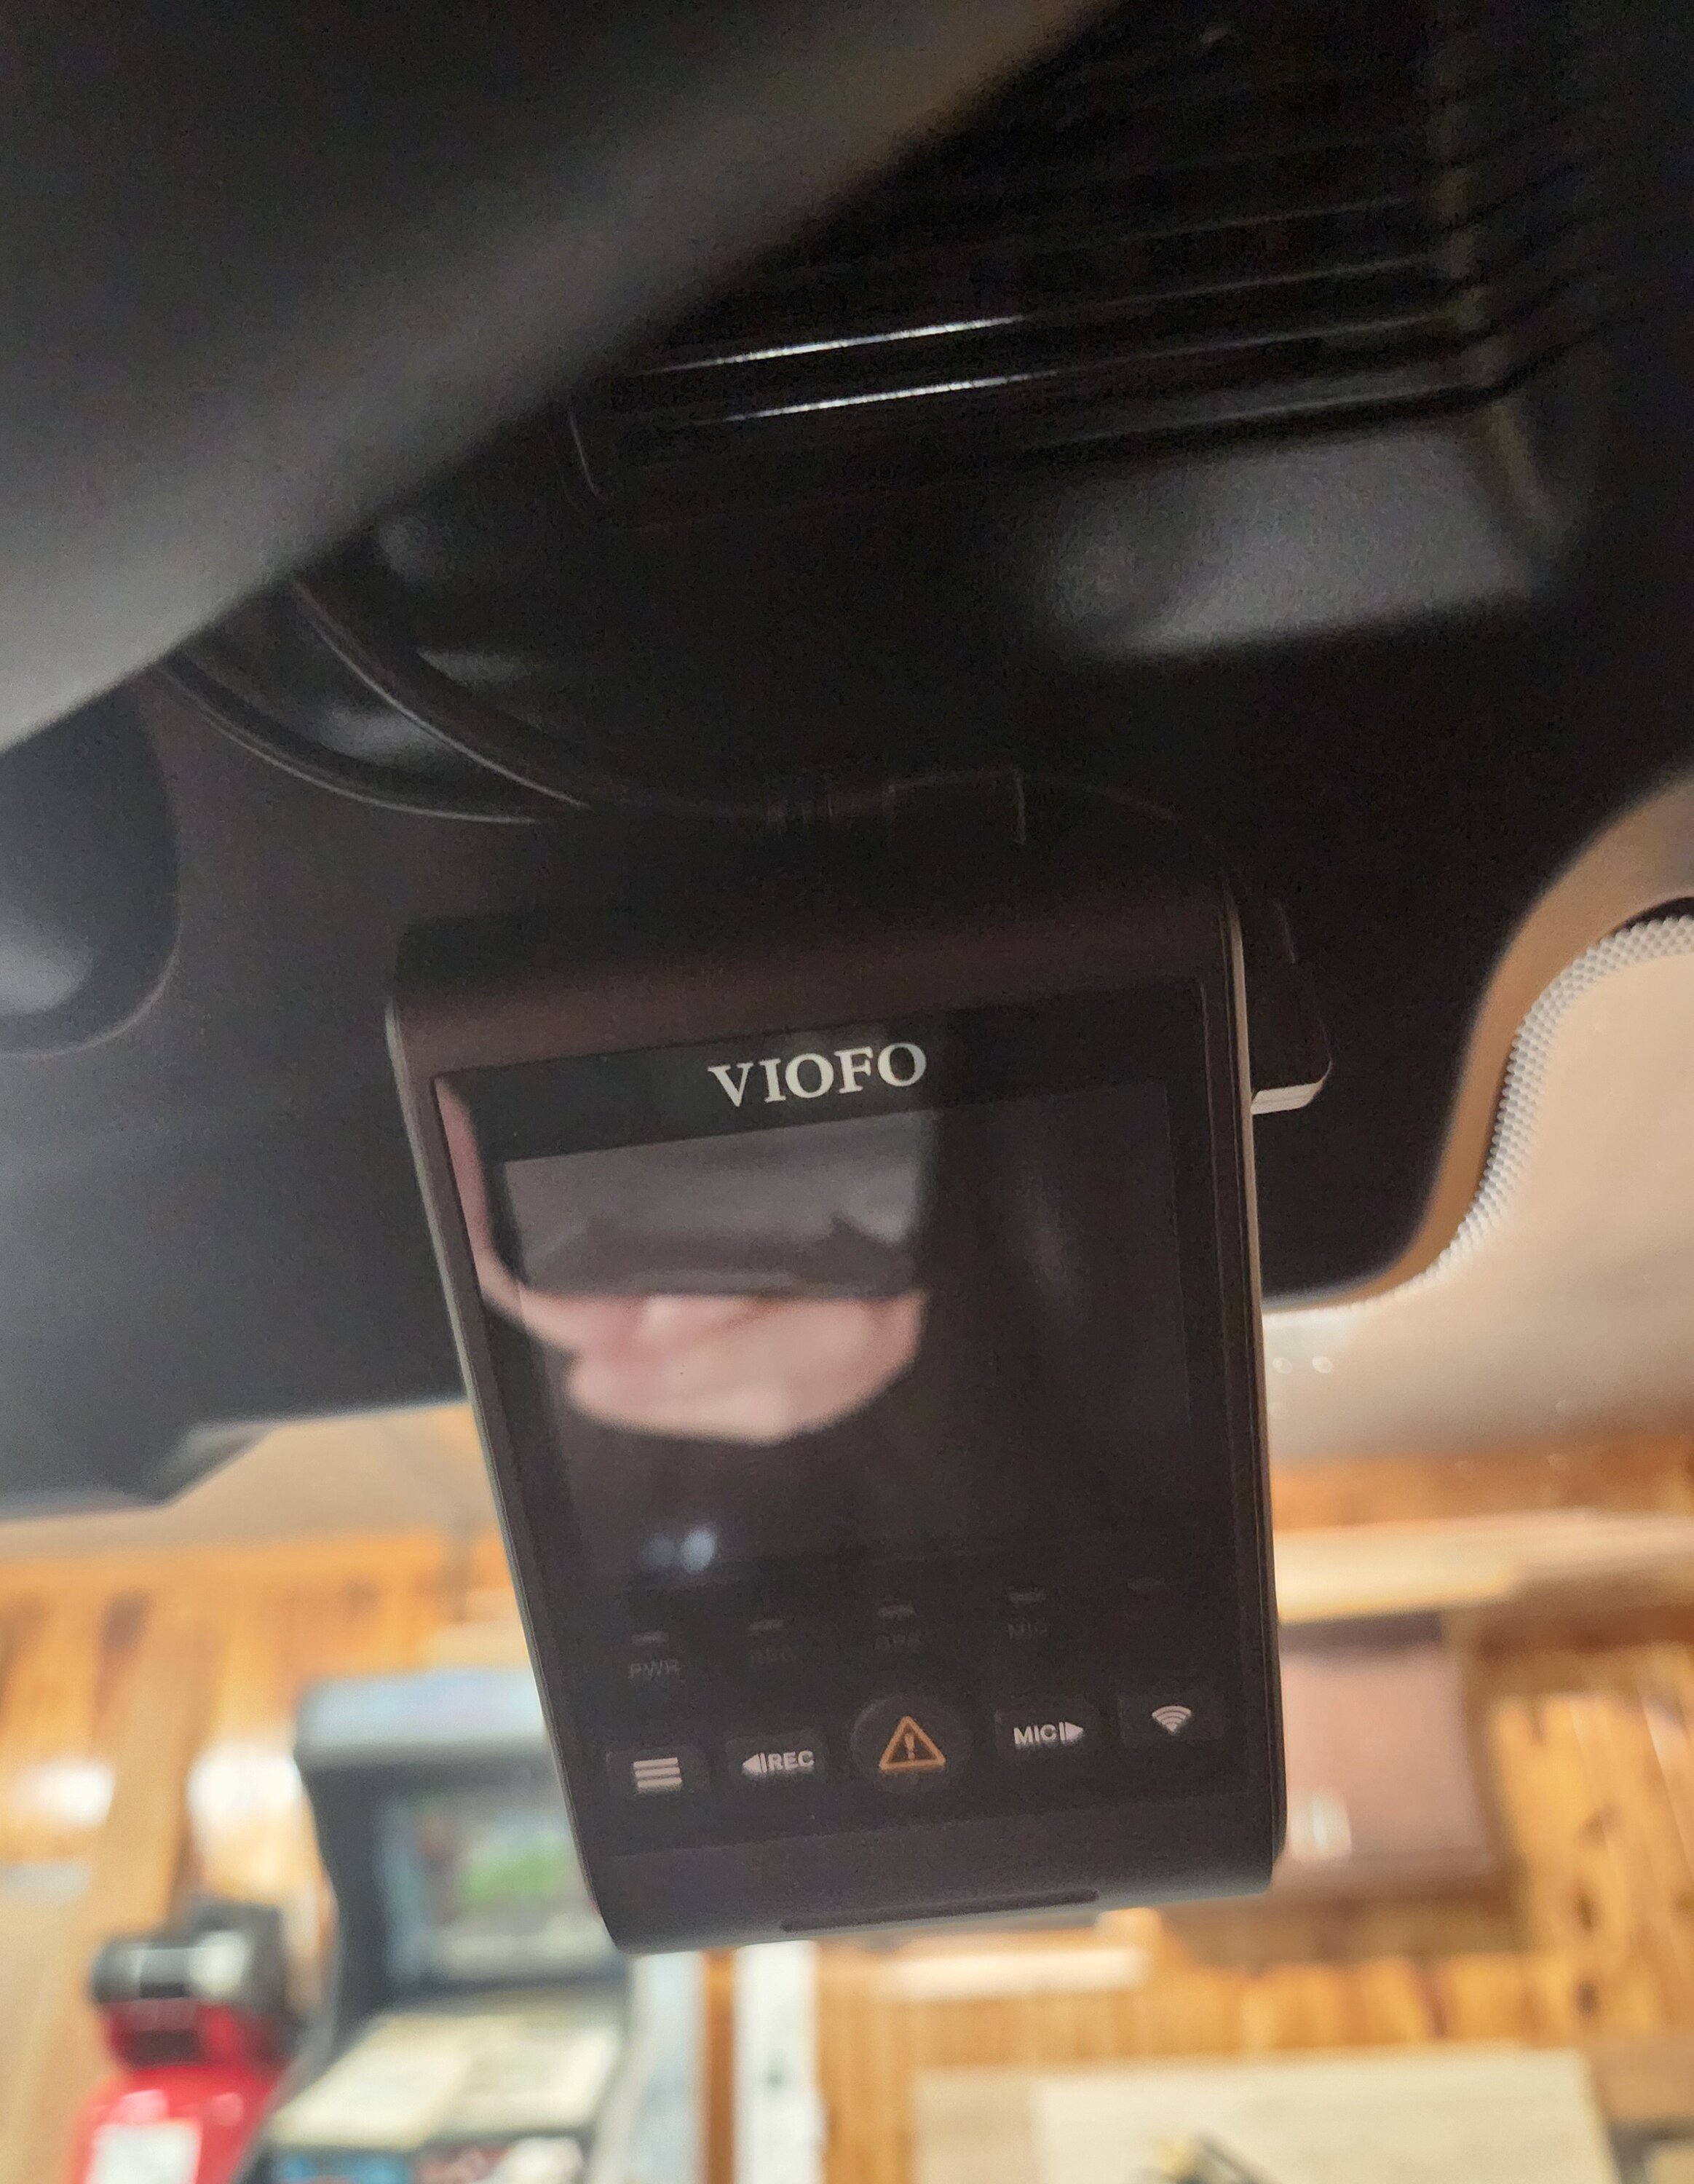 S650 Mustang The Dash cam thread 20231011_065019